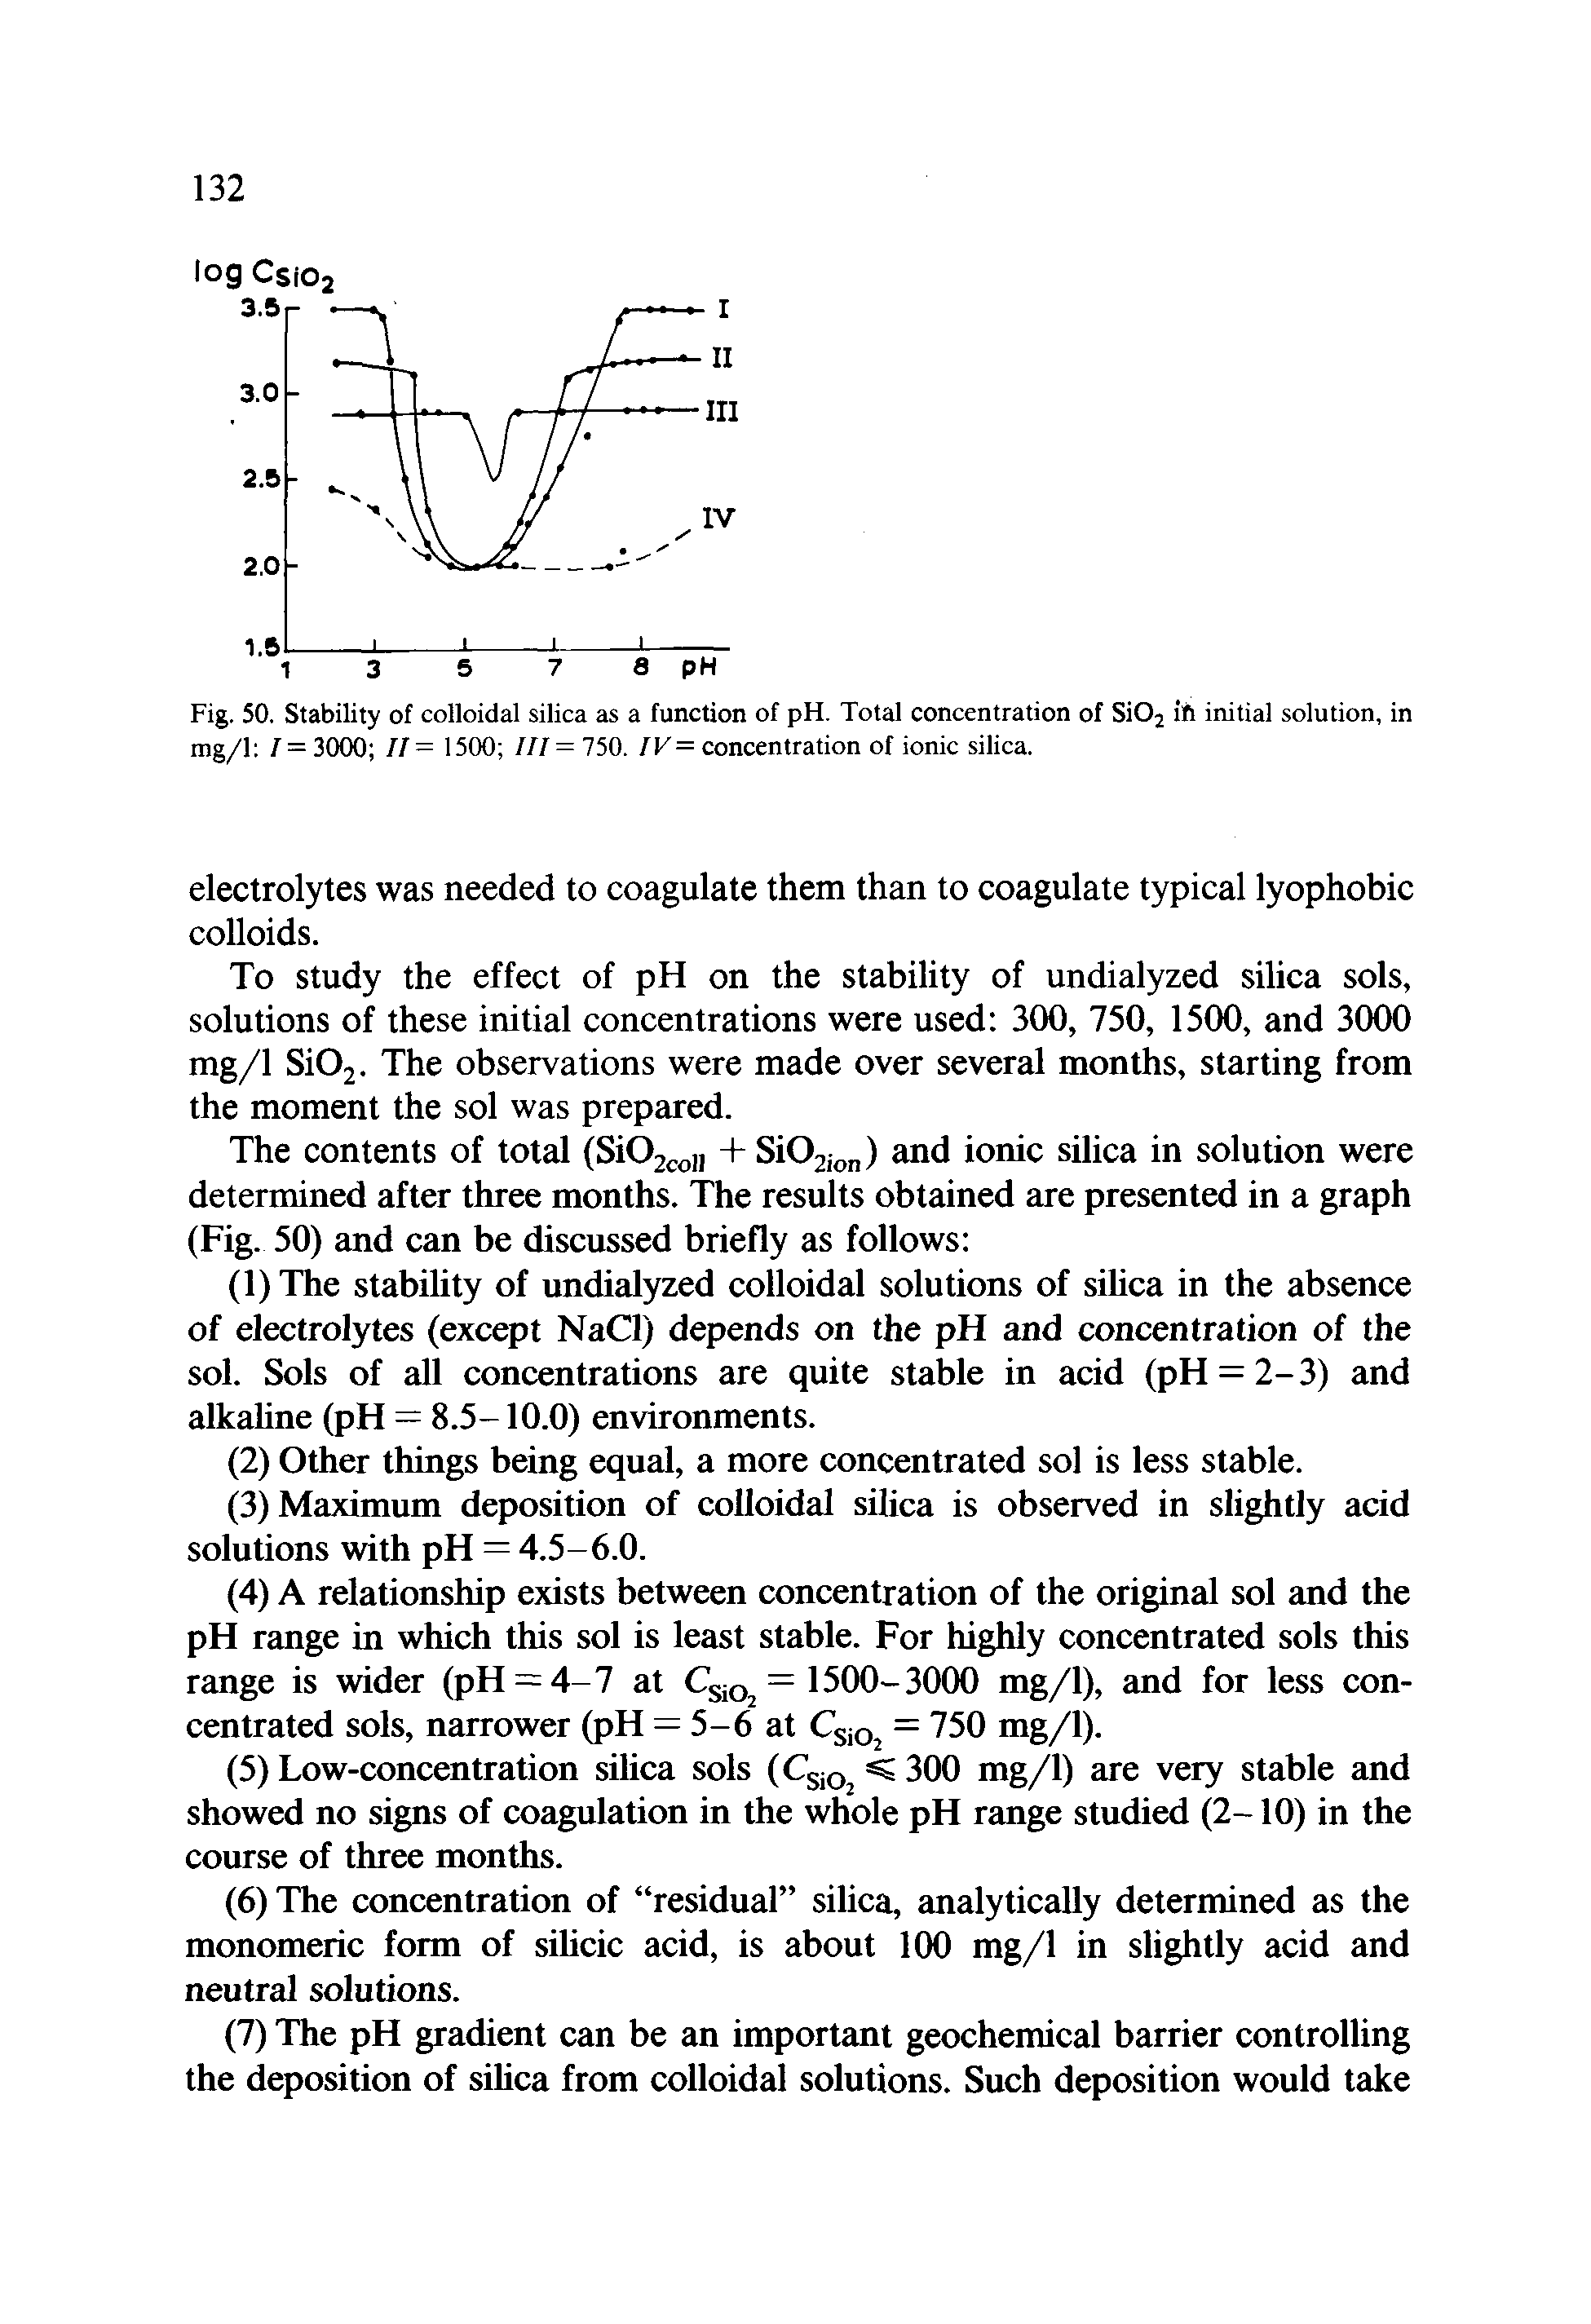 Fig. 50. Stability of colloidal silica as a function of pH. Total concentration of SiOj ift initial solution, in mg/1 / = 3000 11= 1500 in=150. /F= concentration of ionic silica.